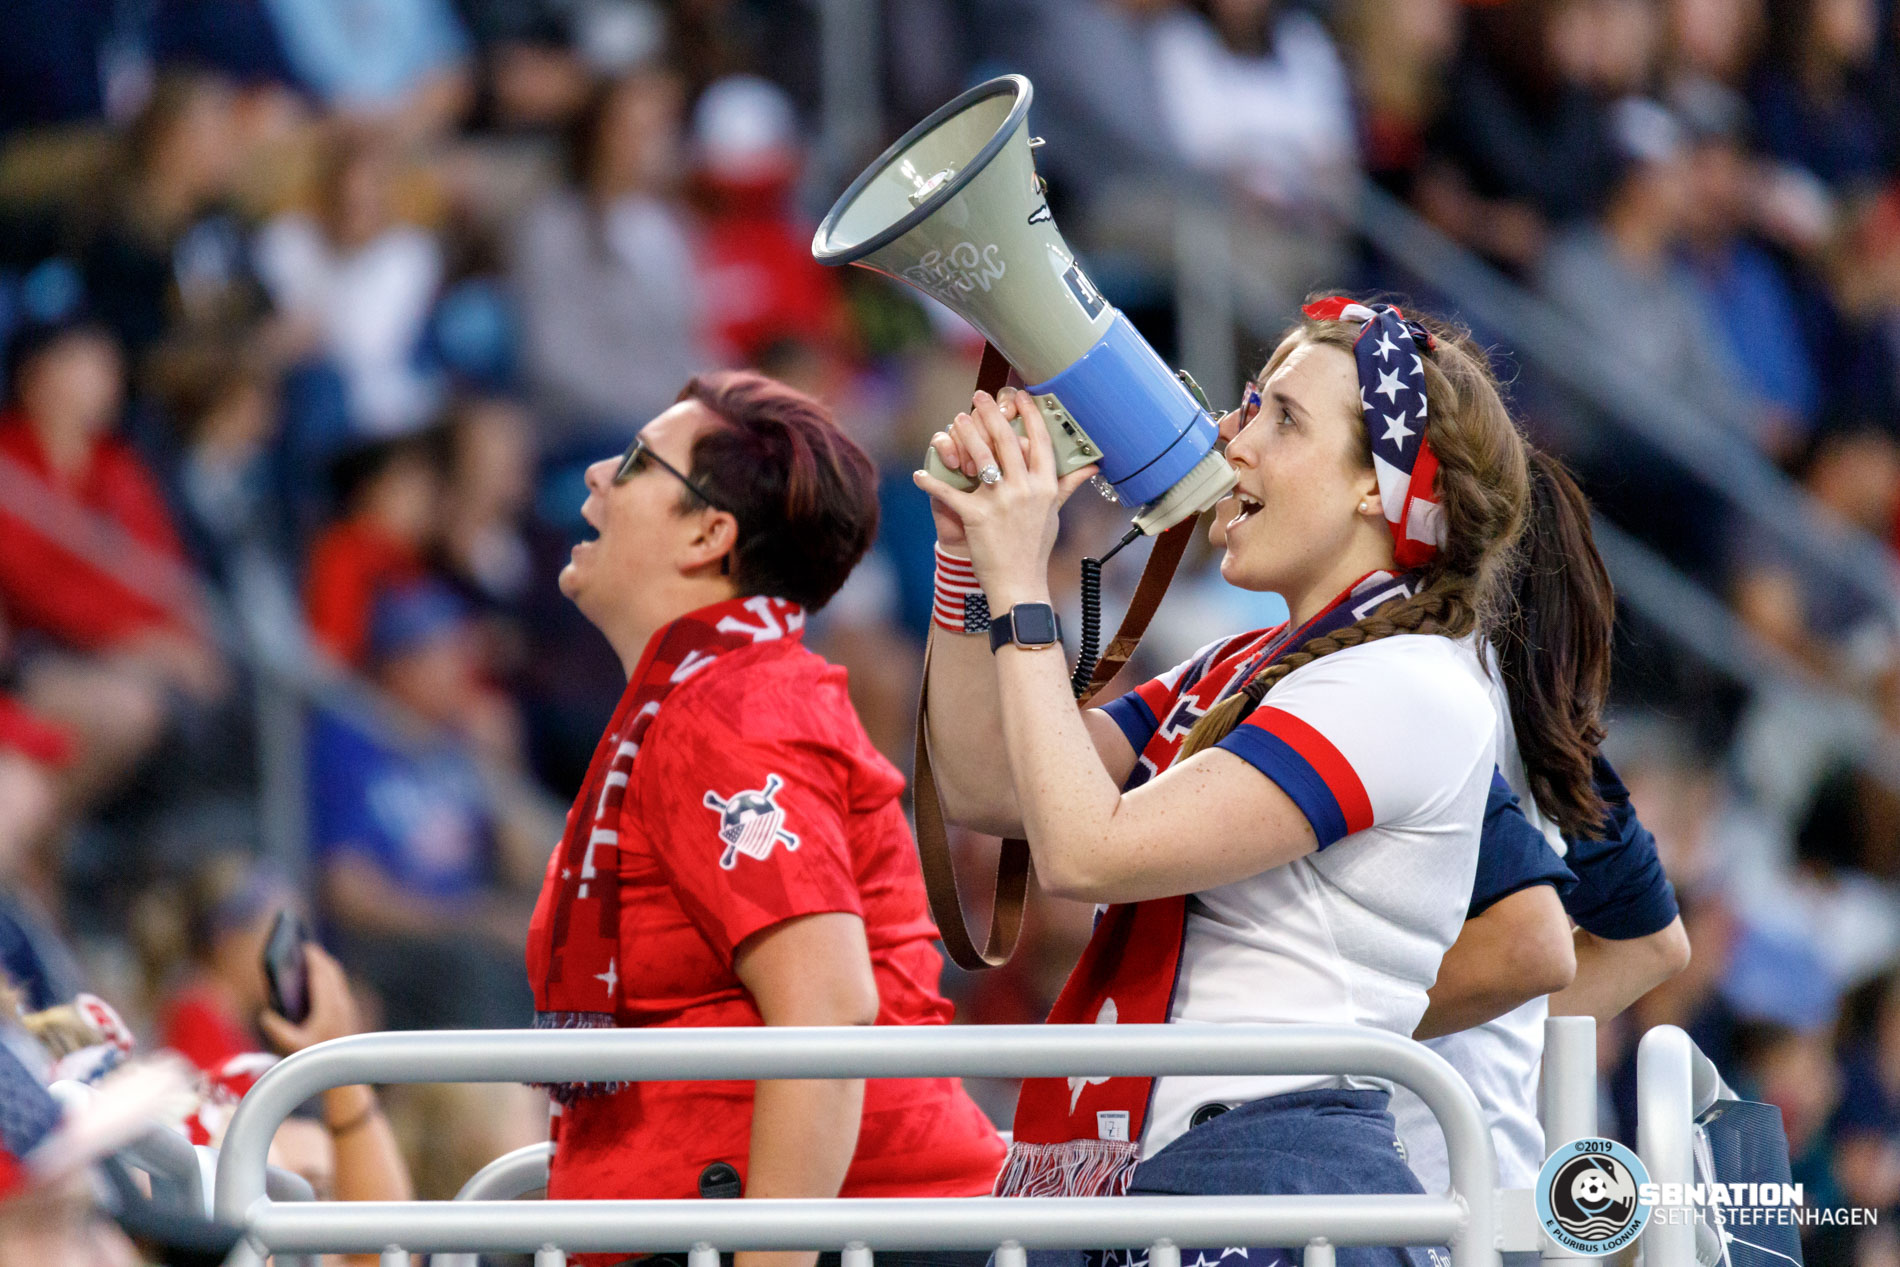 September 3, 2019 - Saint Paul, Minnesota, United States - American Outlaw capos lead the supporters in song during the USA World Cup Victory Tour  match against Portugal at Allianz Field. 
